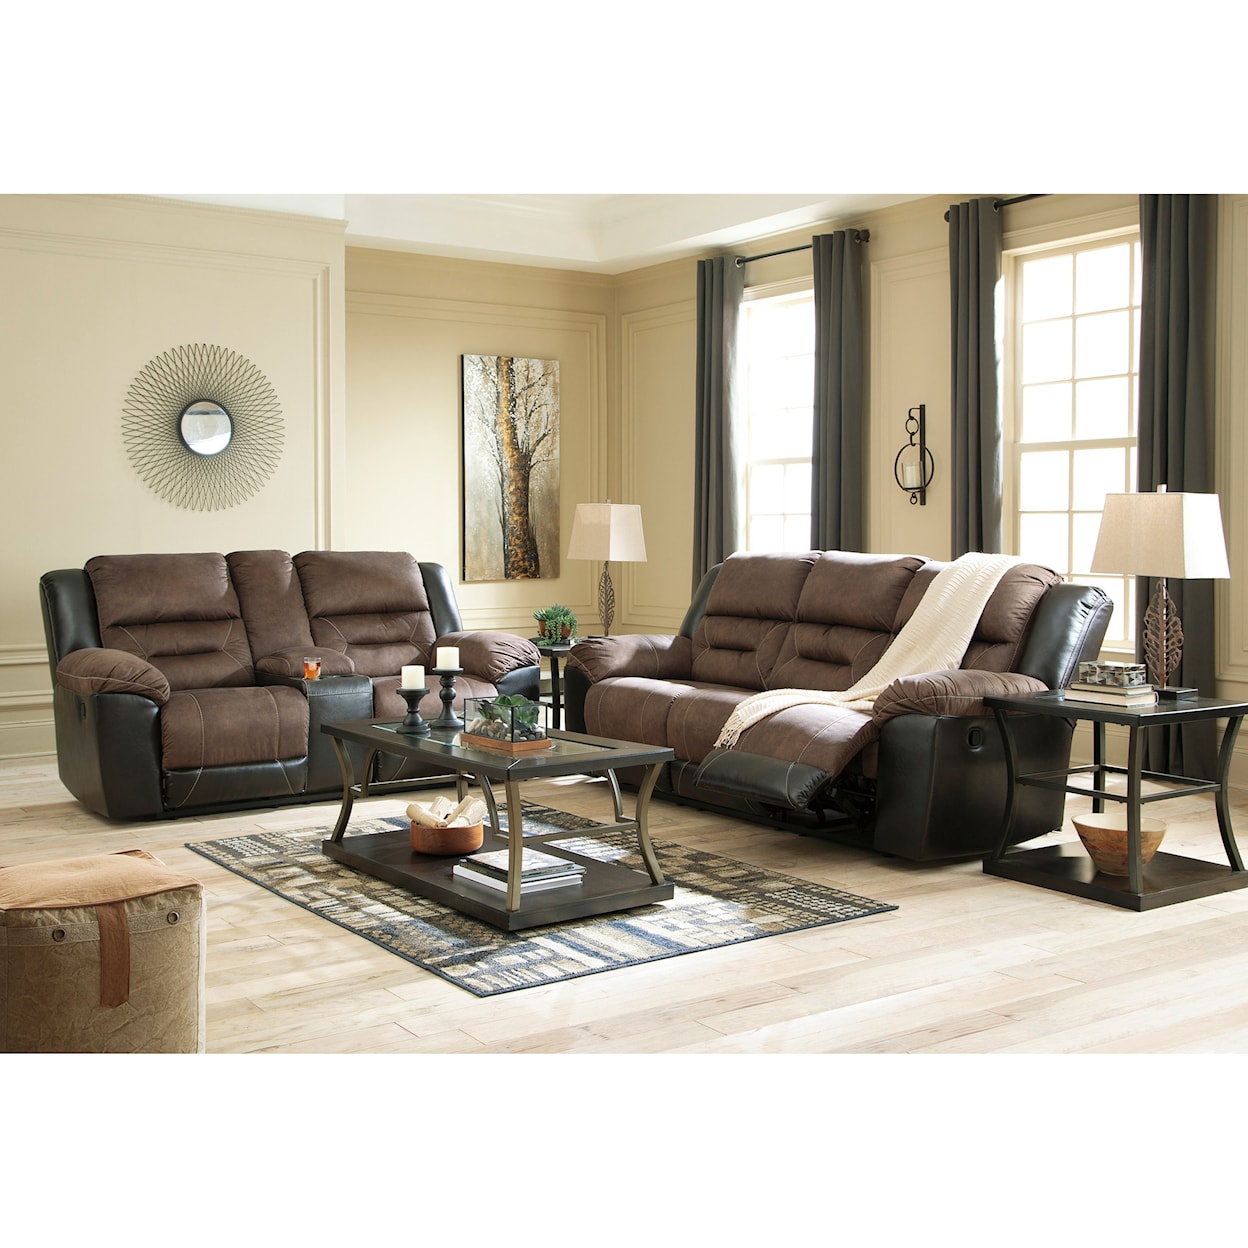 Signature Design by Ashley Earhart Reclining Living Room Group